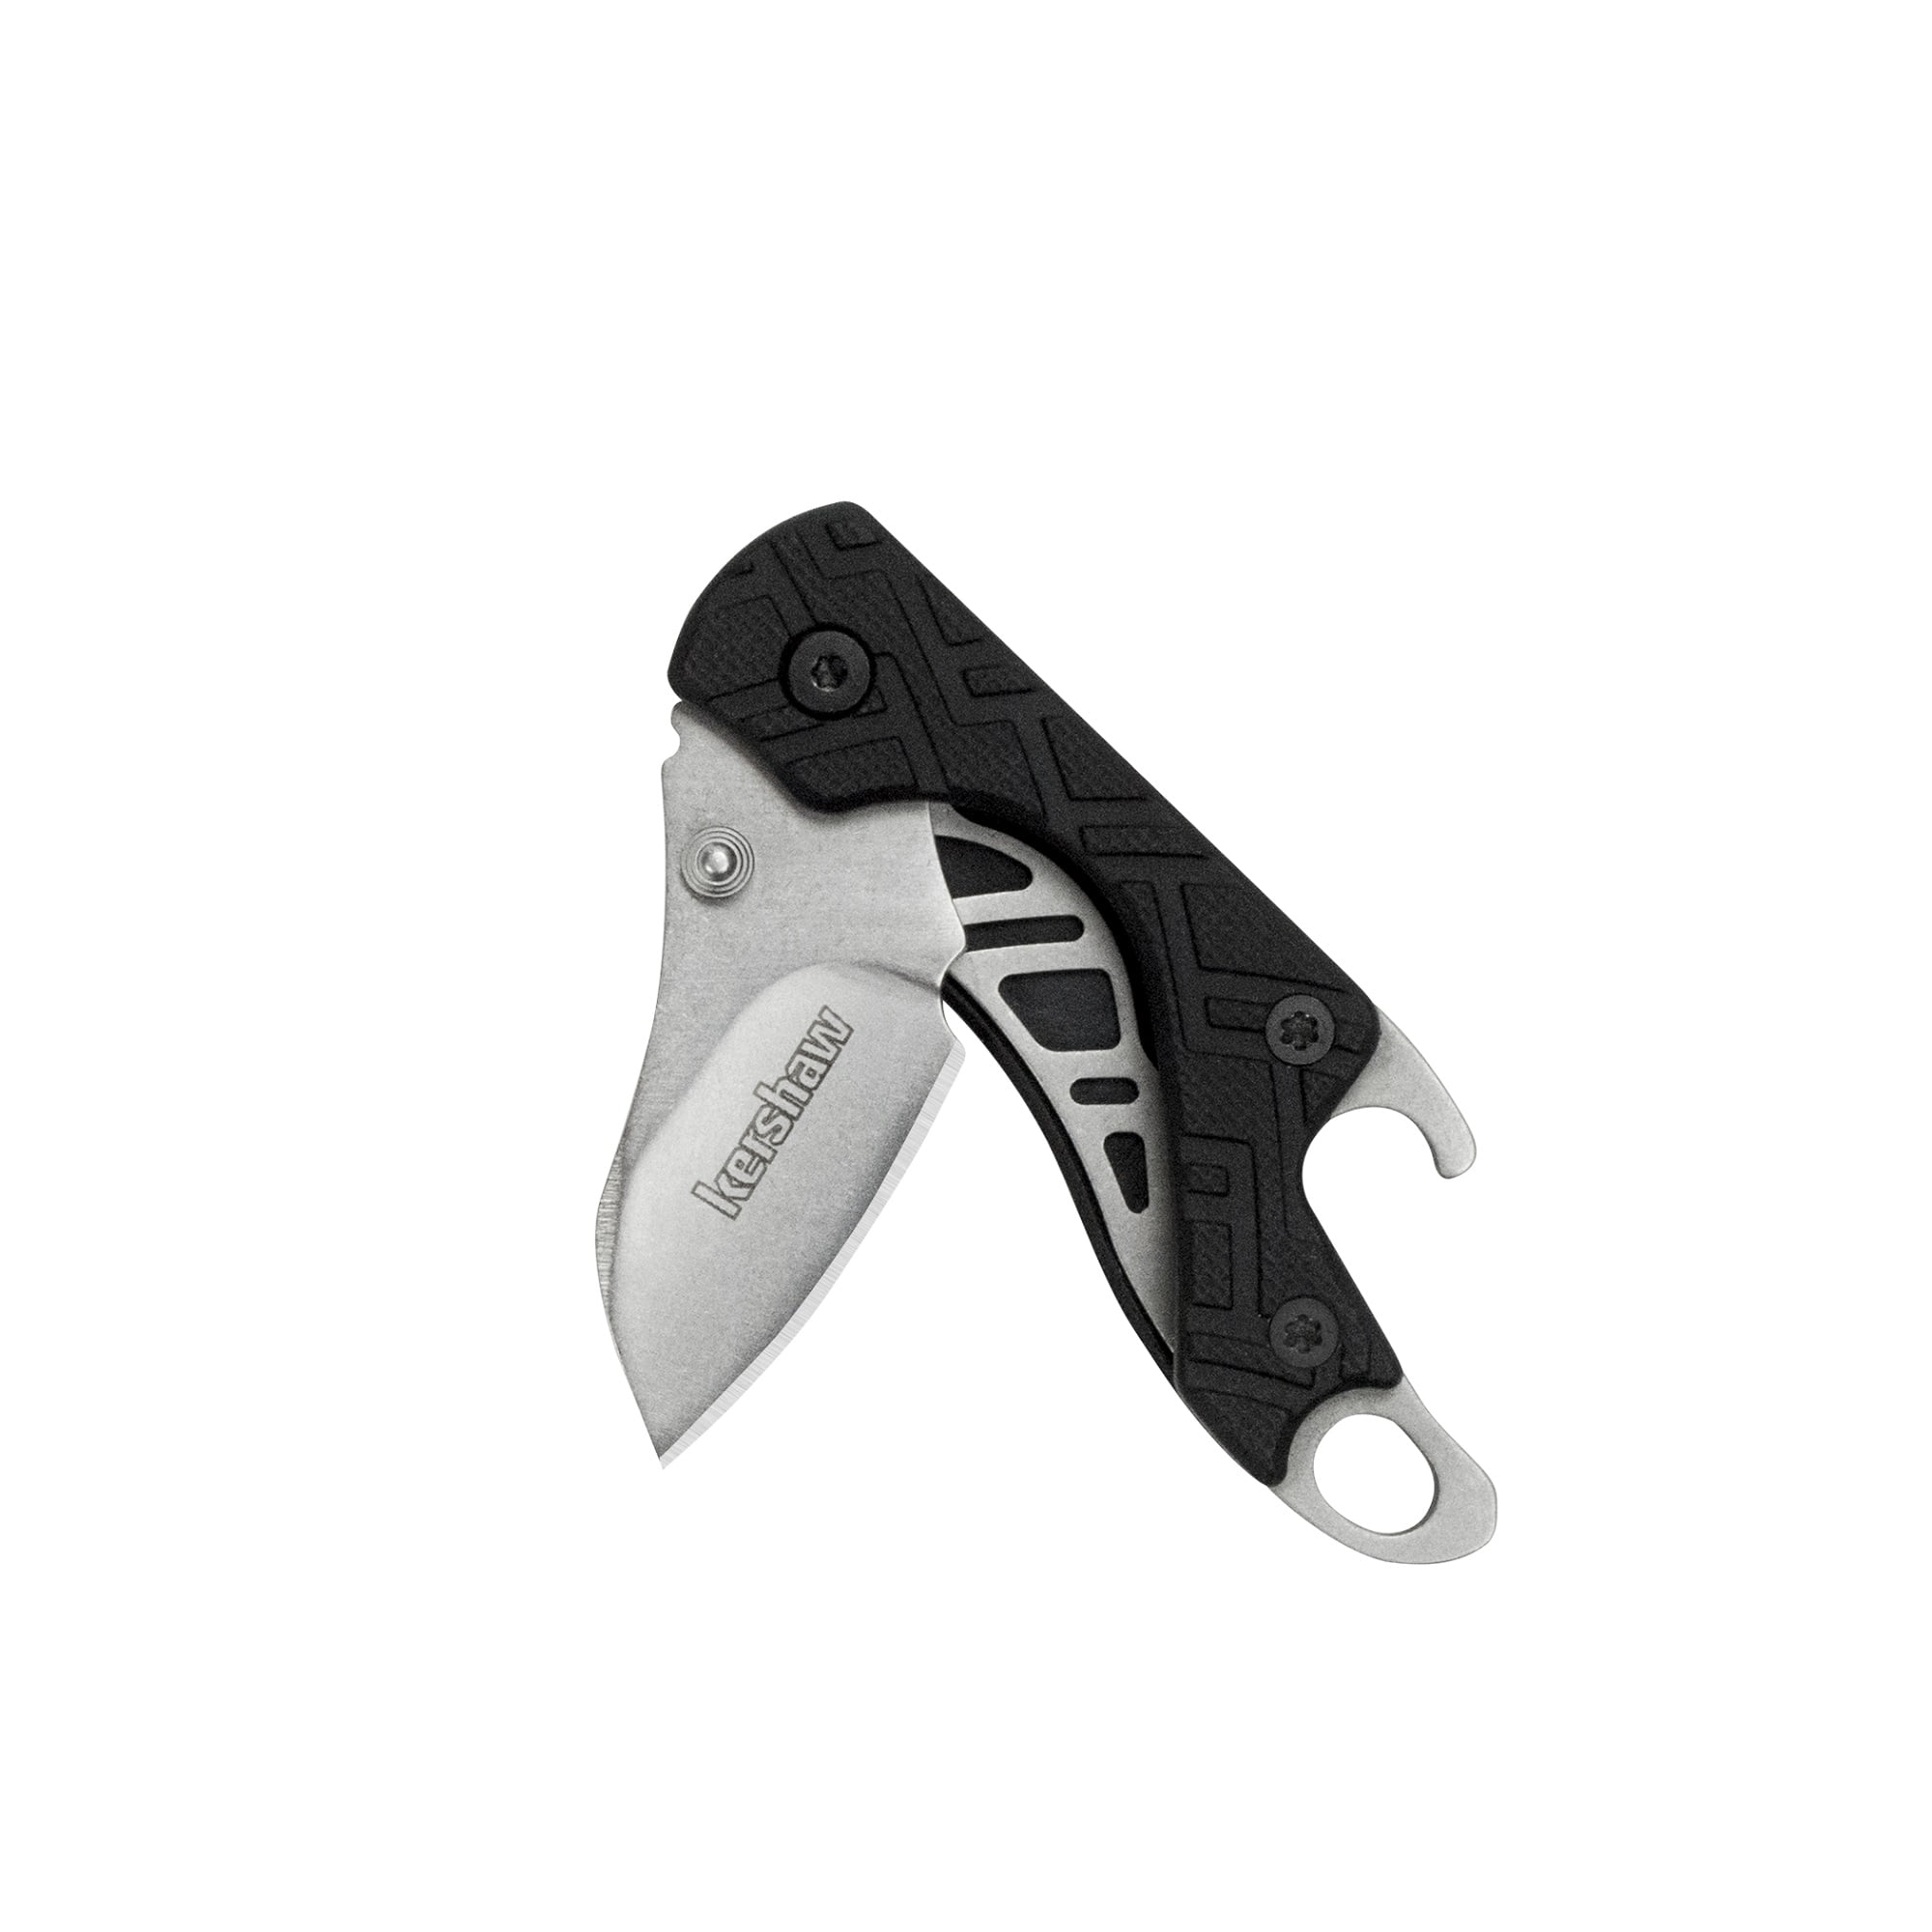 Details about   KERSHAW TX TOOL Must Have for Kershaw Owners & Collectors Plus It's Cool NIB 